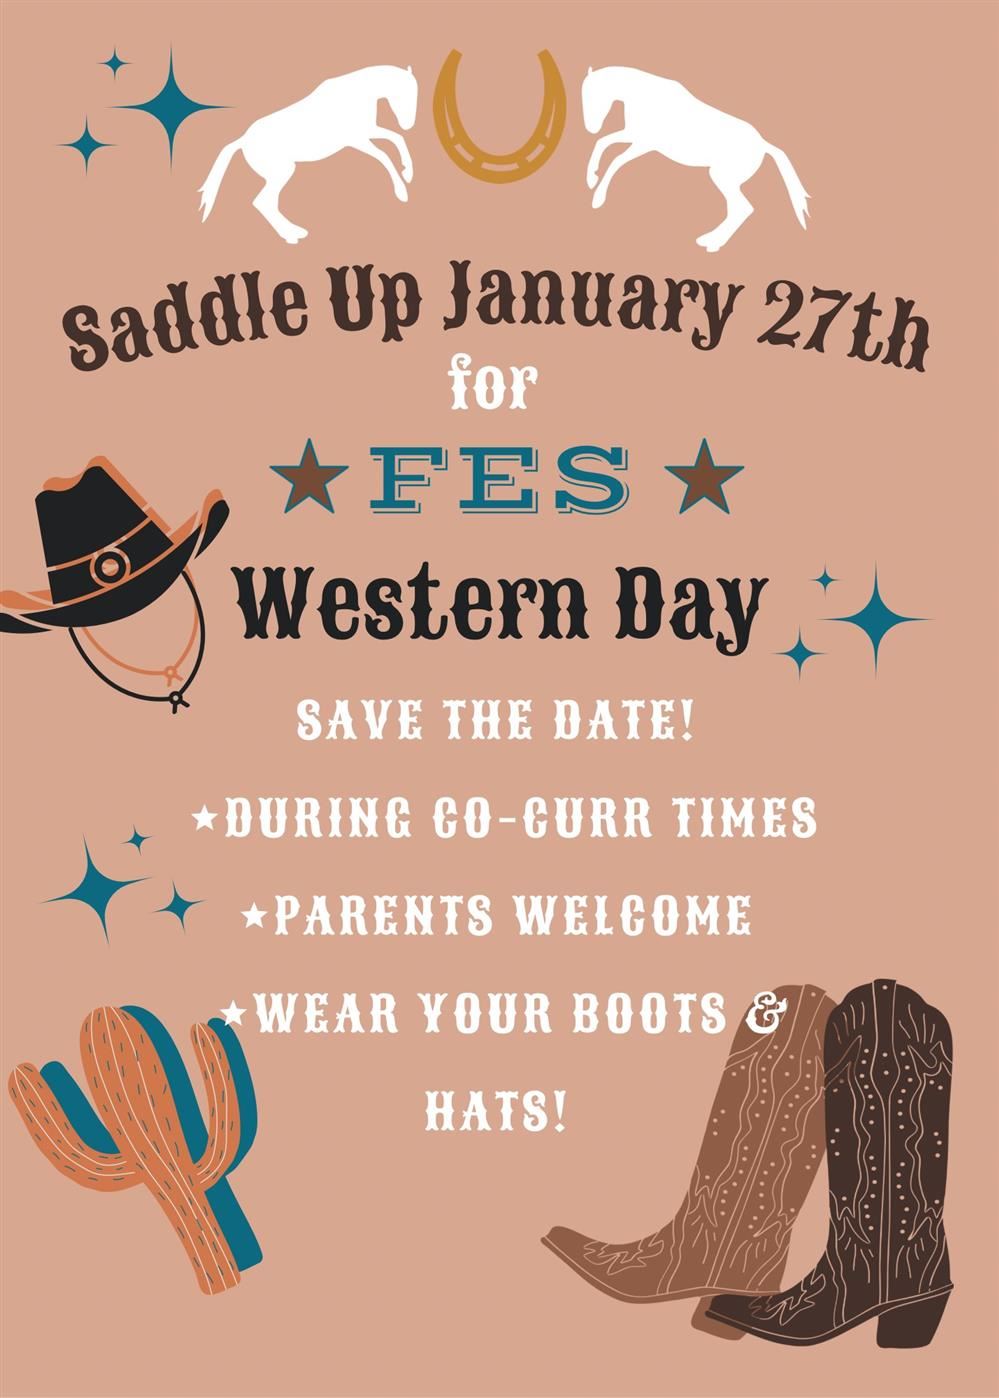  Western Day - Jan. 27 - During students' Co-Curr